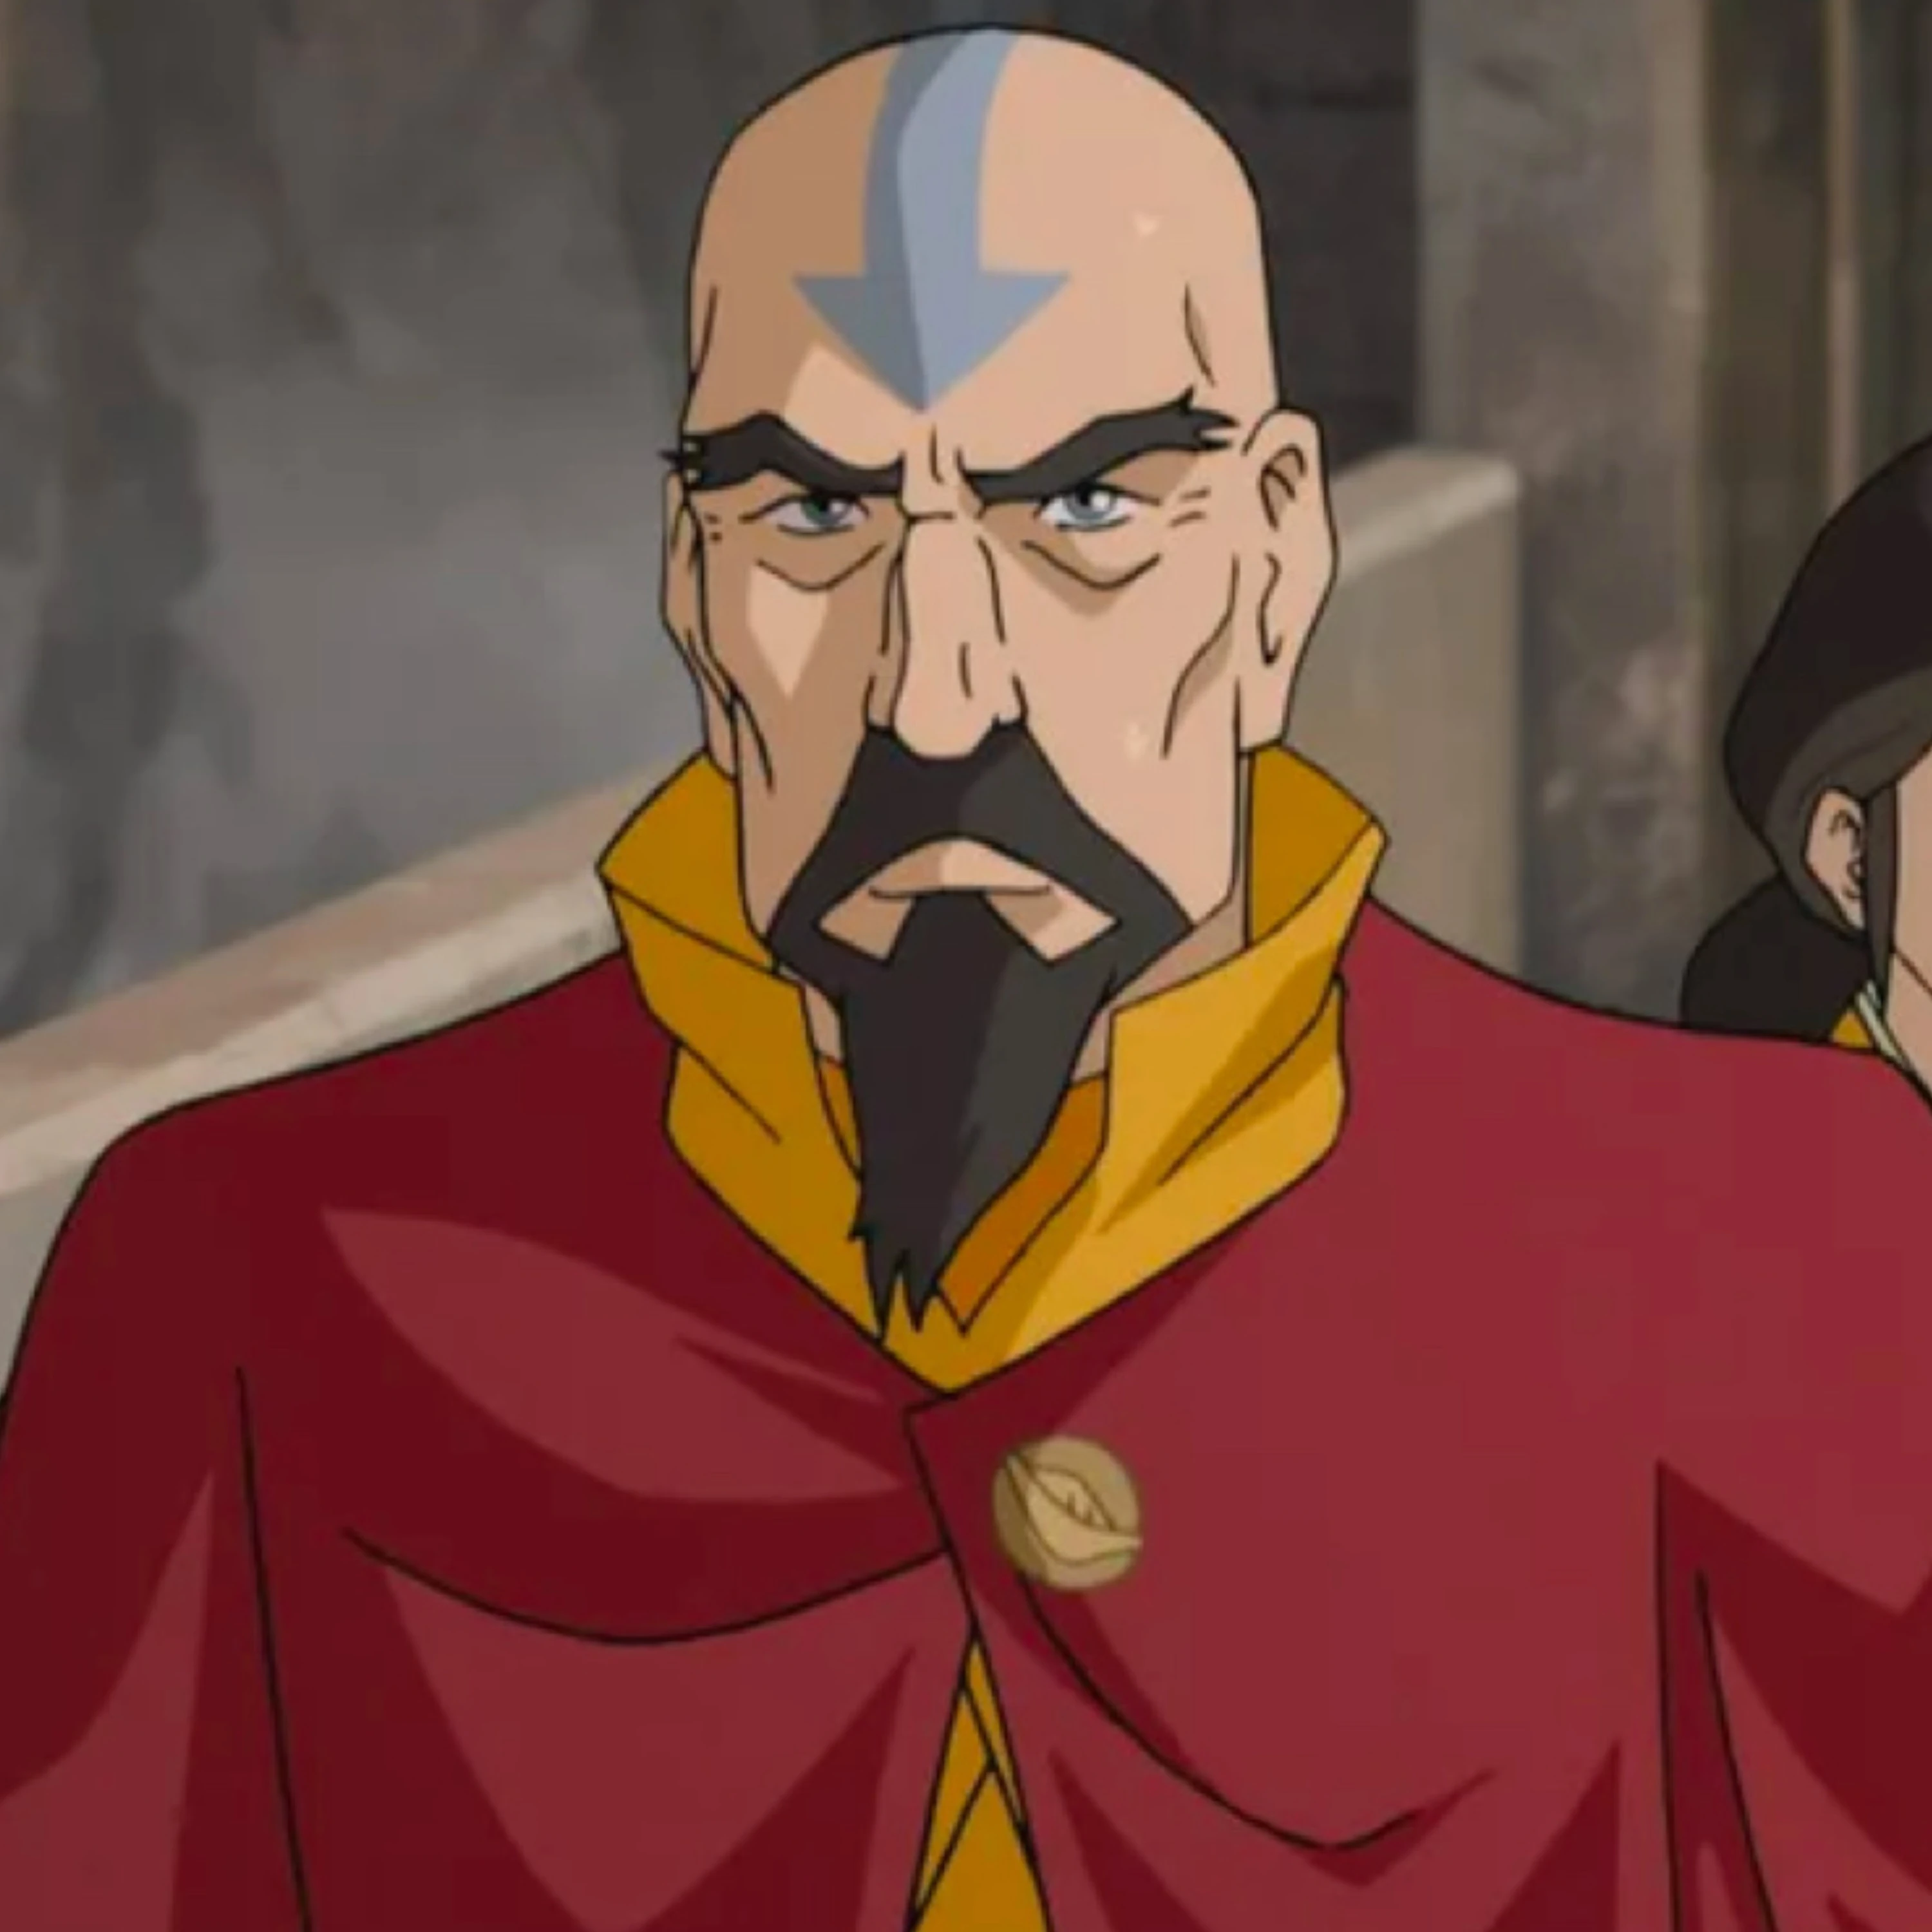 Tenzin, a severe looking man with pronounced eyebrows, a sharp goatee, and an airbending tattoo on his bald head